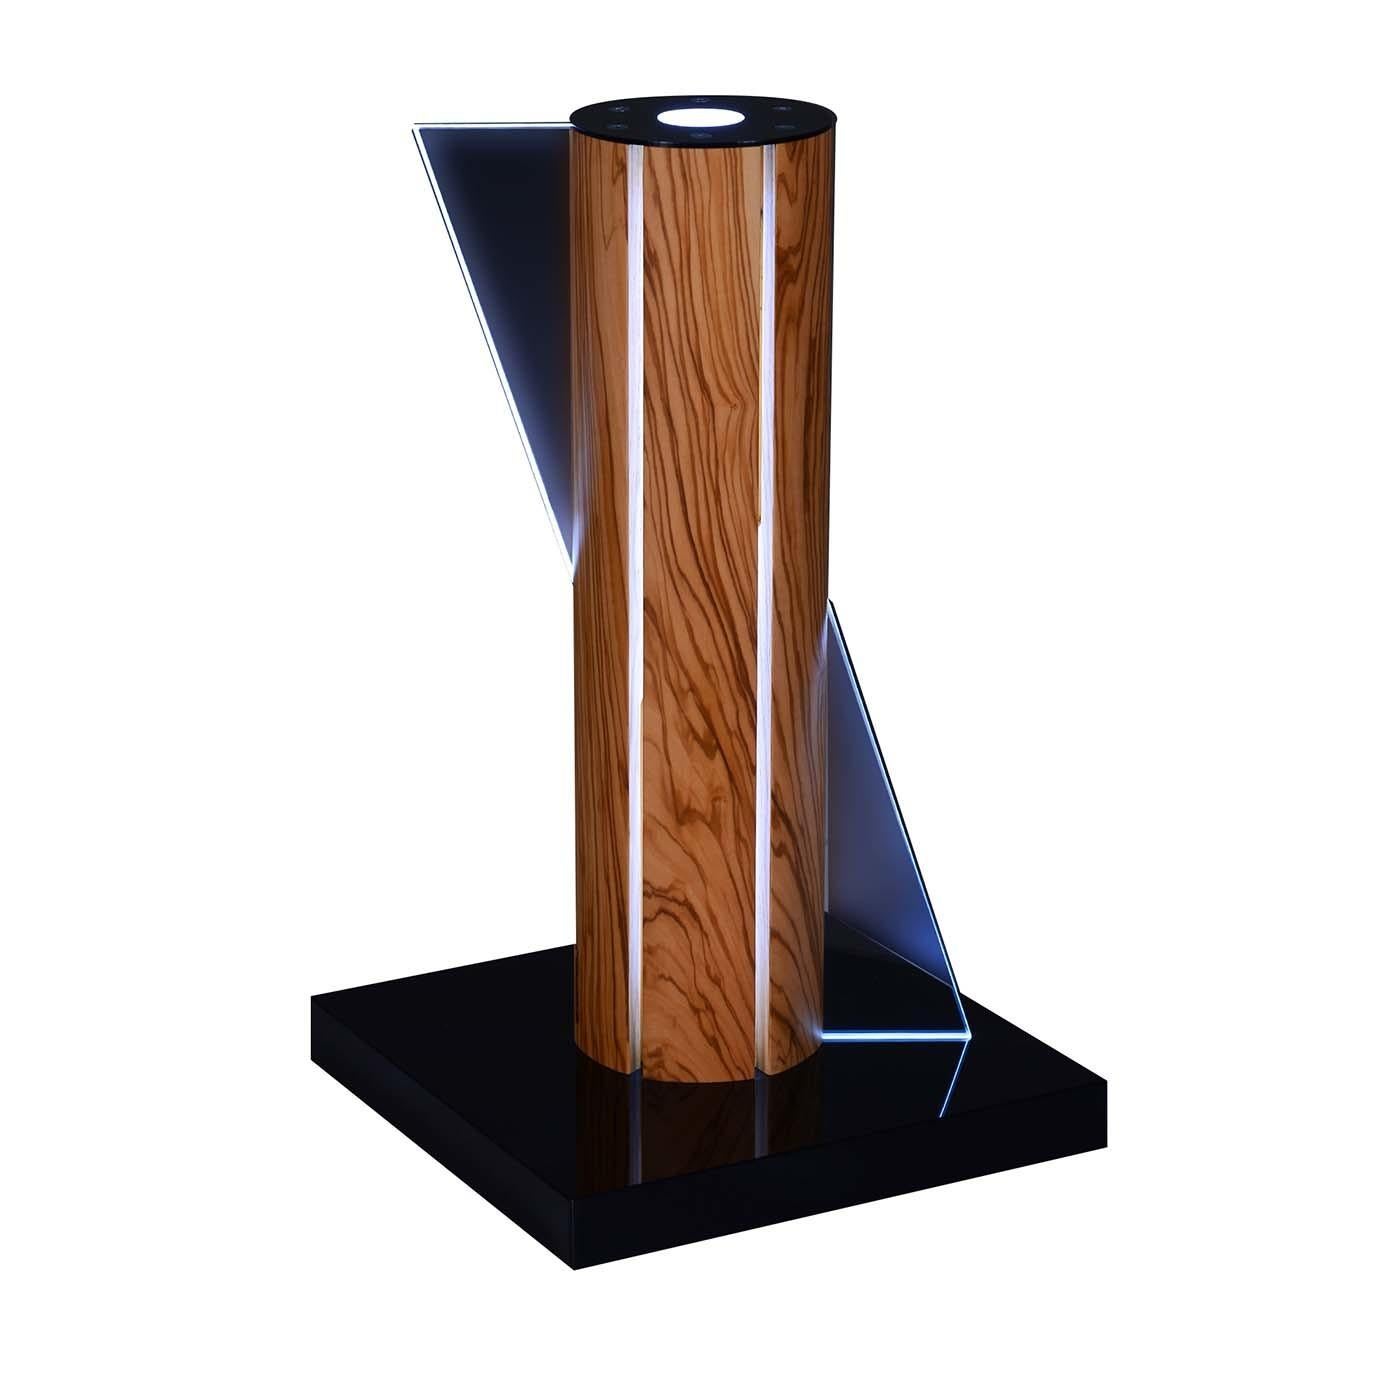 This olive wood table lamp represents the durability of olive trees as they grow over the centuries. When struck by lightning on a stormy night, however, nature will leave its mark on some of them with a bright light piercing their trunk. White LED